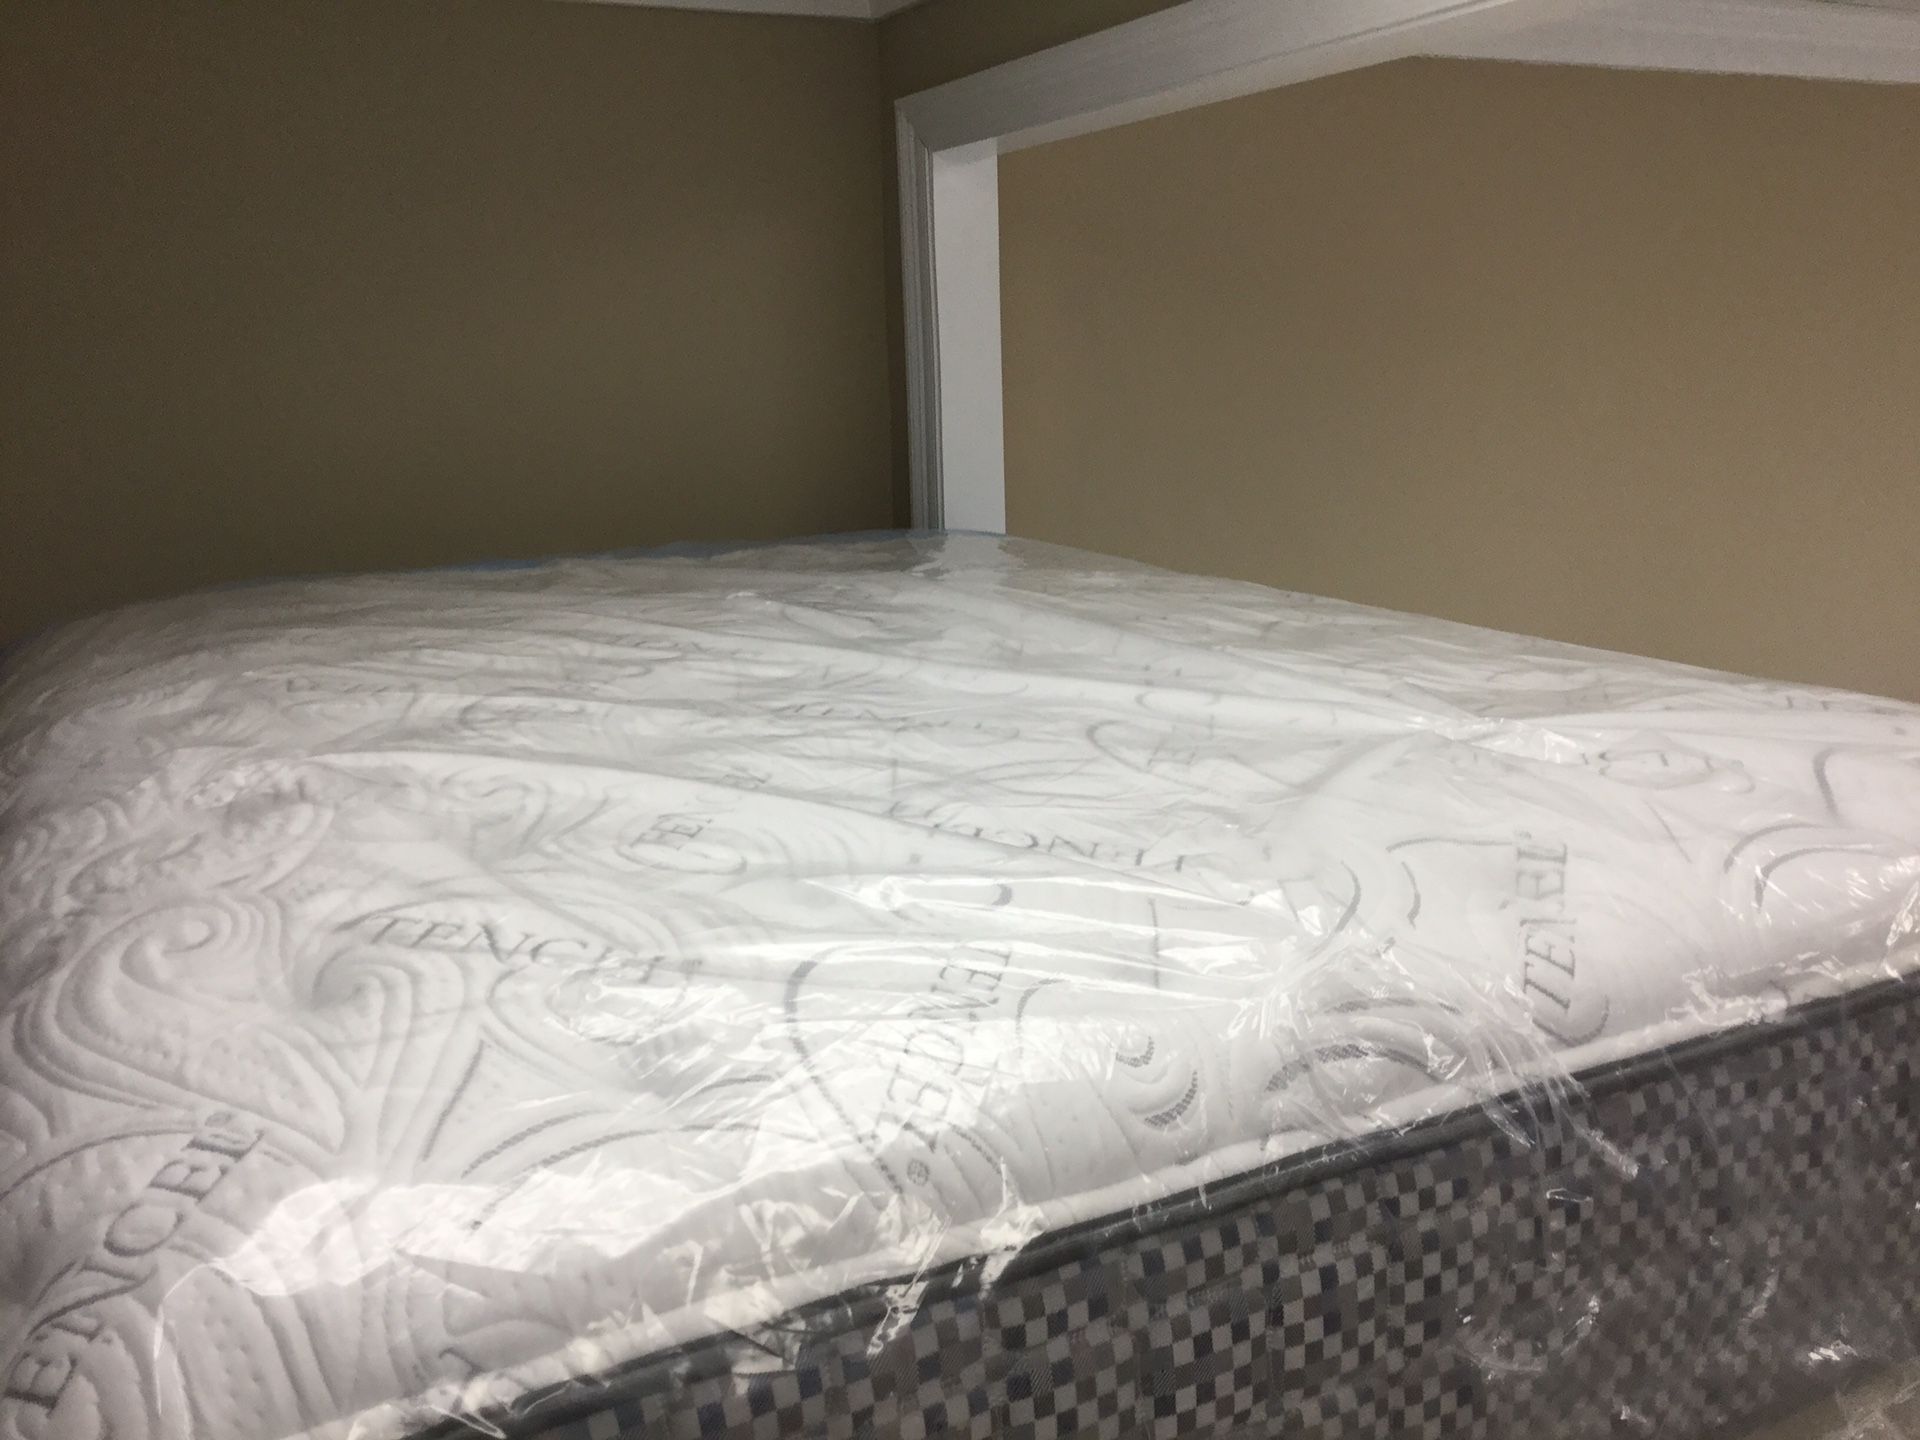 New Mattress Sets - Brand New Factory Direct - Never Used